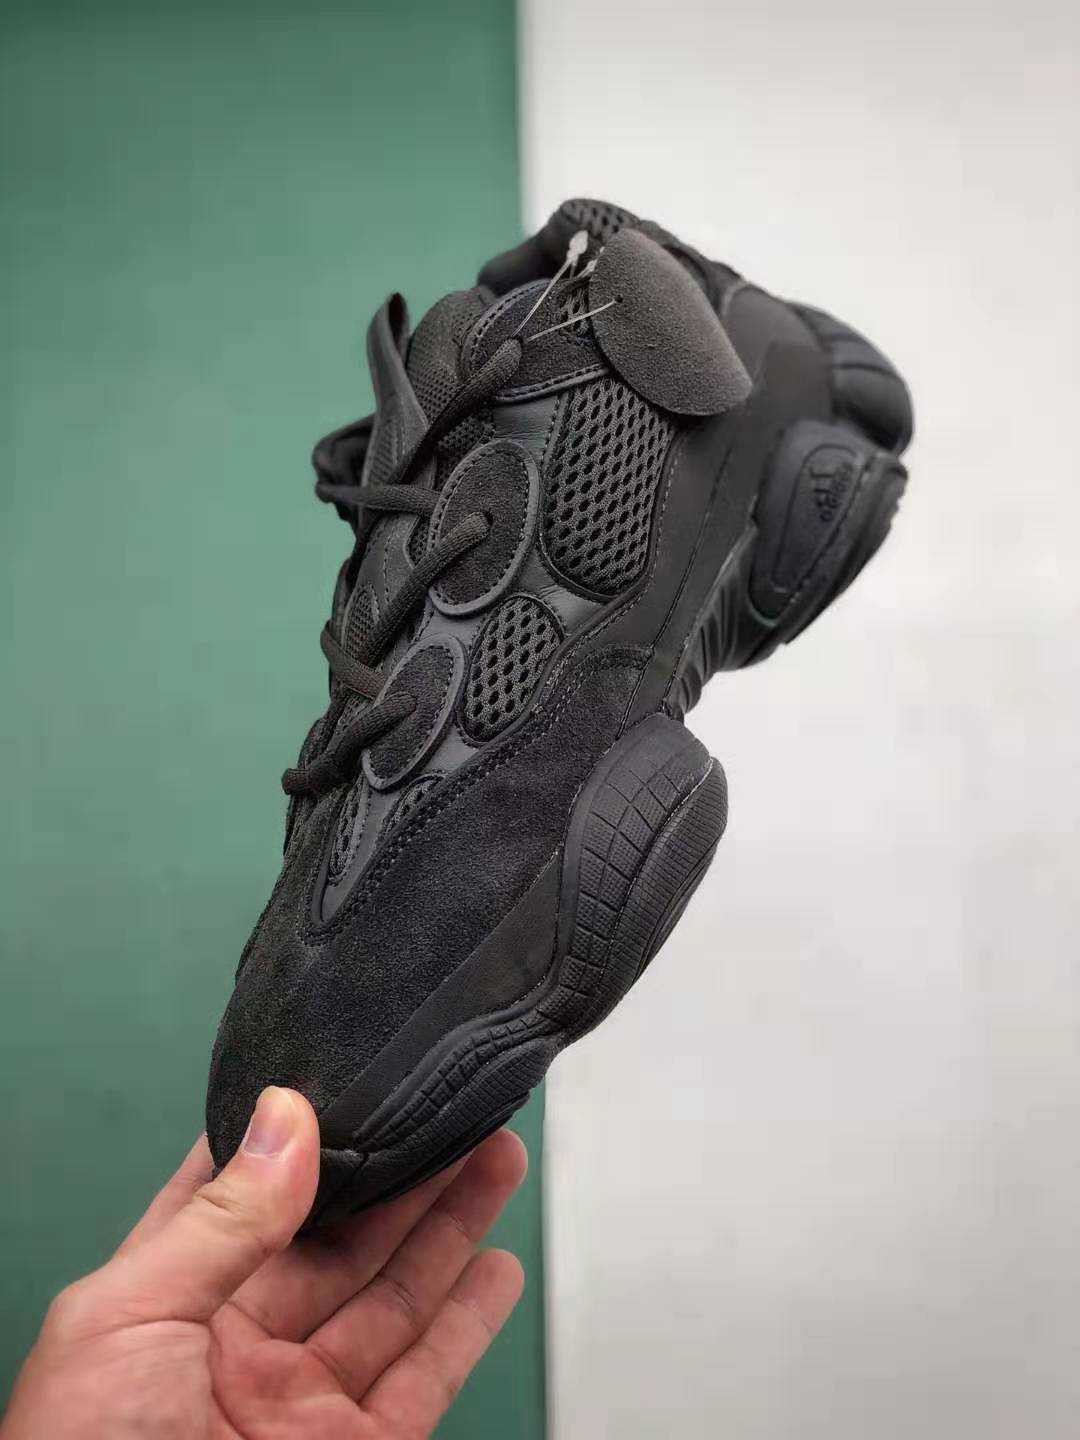 Adidas Yeezy 500 Utility Black - Iconic Sneakers for Sale